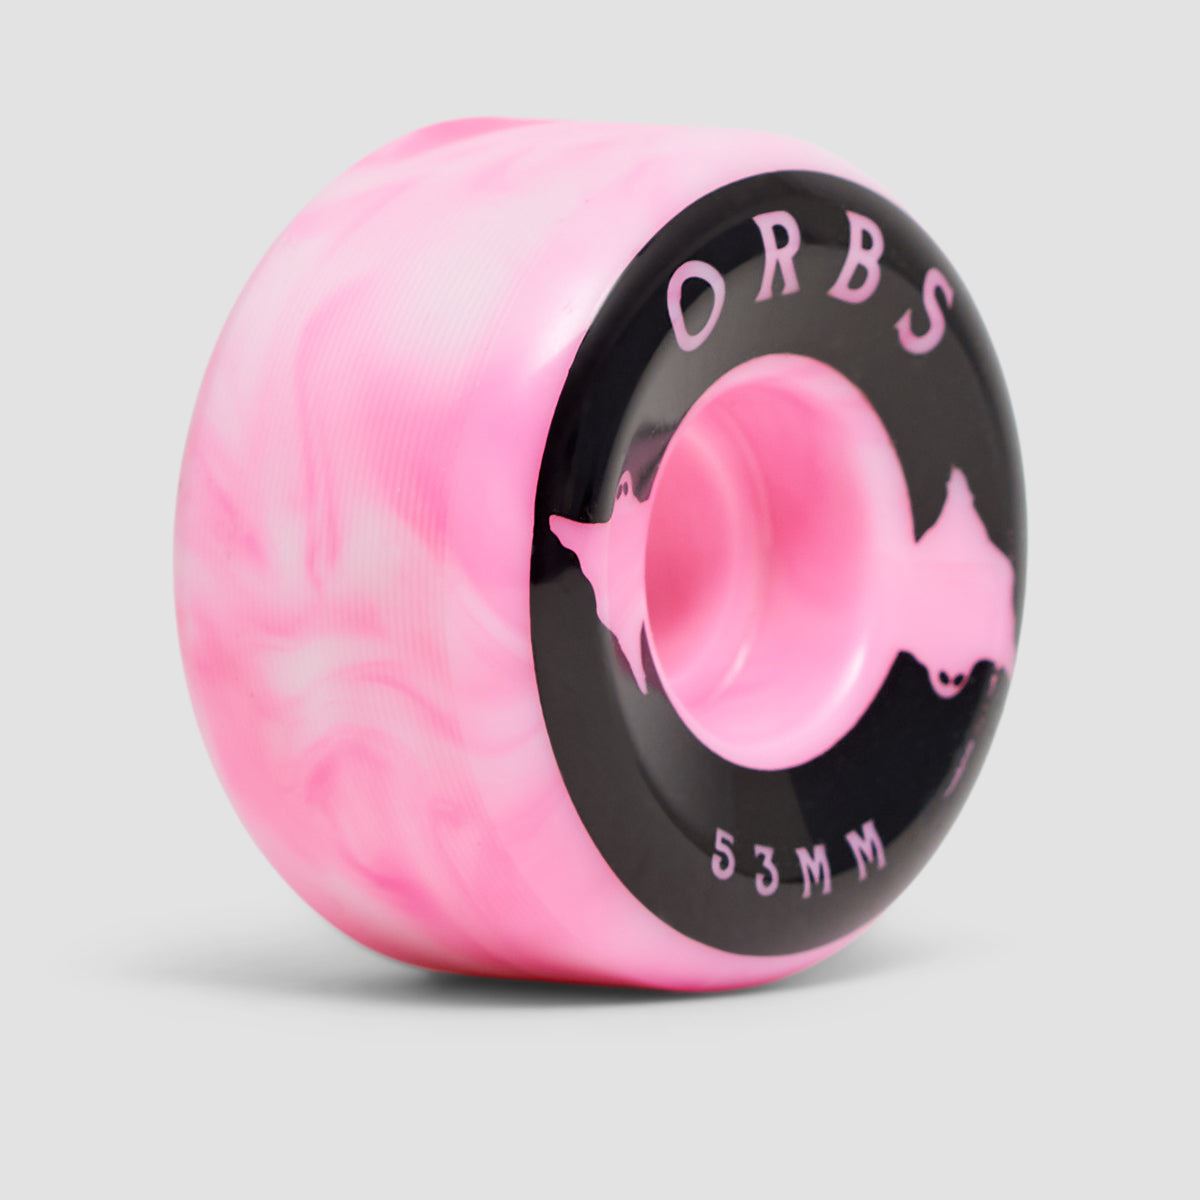 Welcome Orbs Specters Swirls Conical 99A Wheels Pink/White 53mm